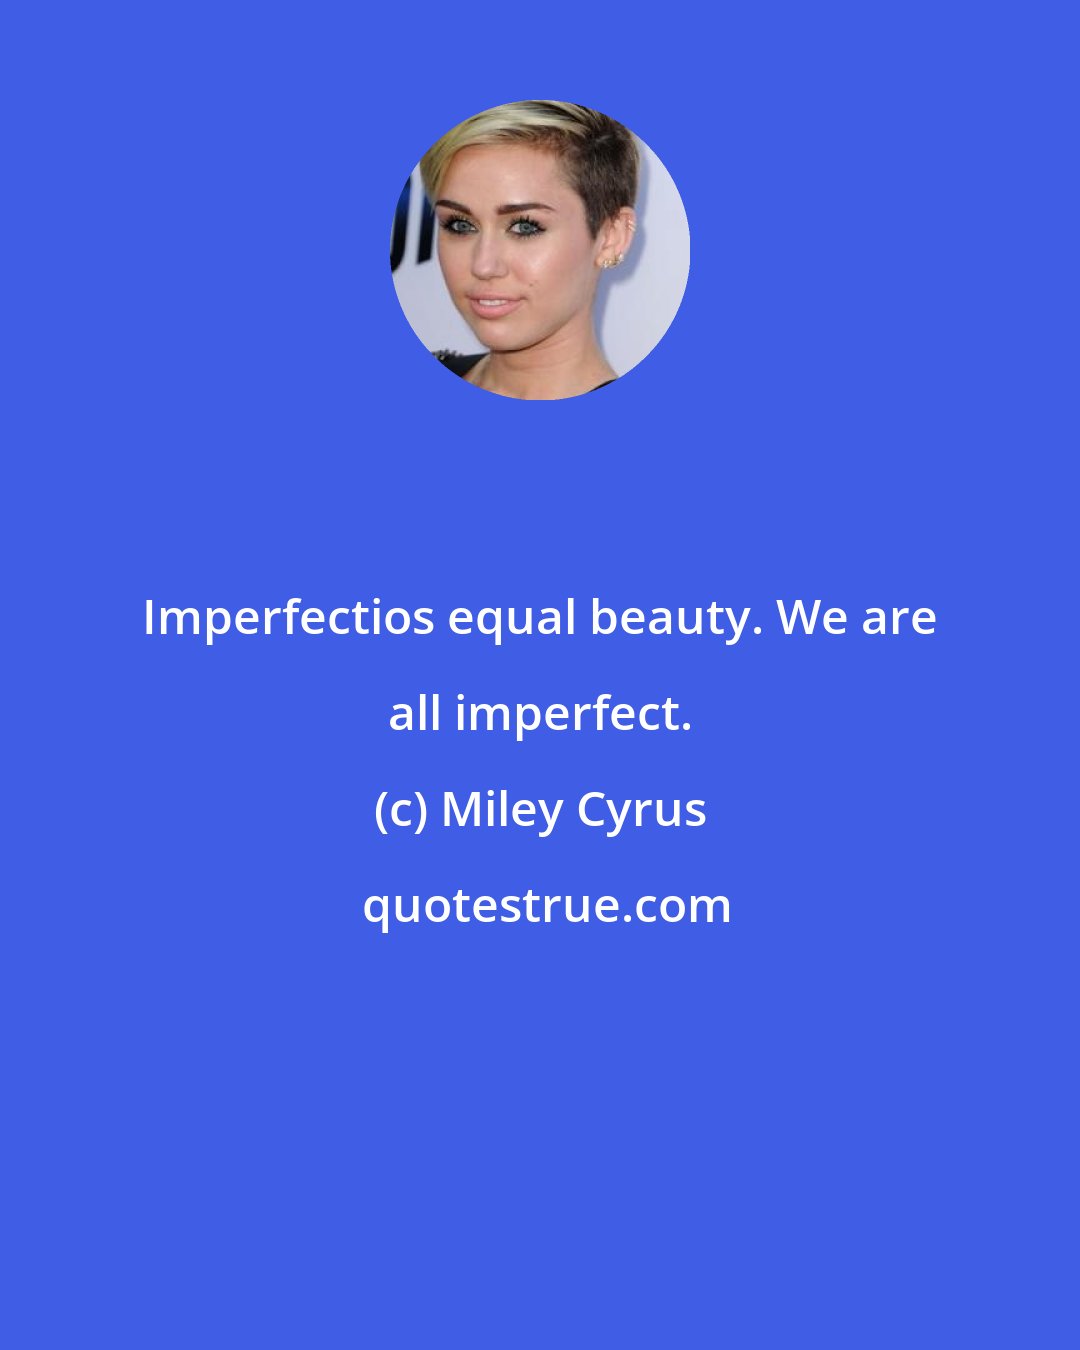 Miley Cyrus: Imperfectios equal beauty. We are all imperfect.